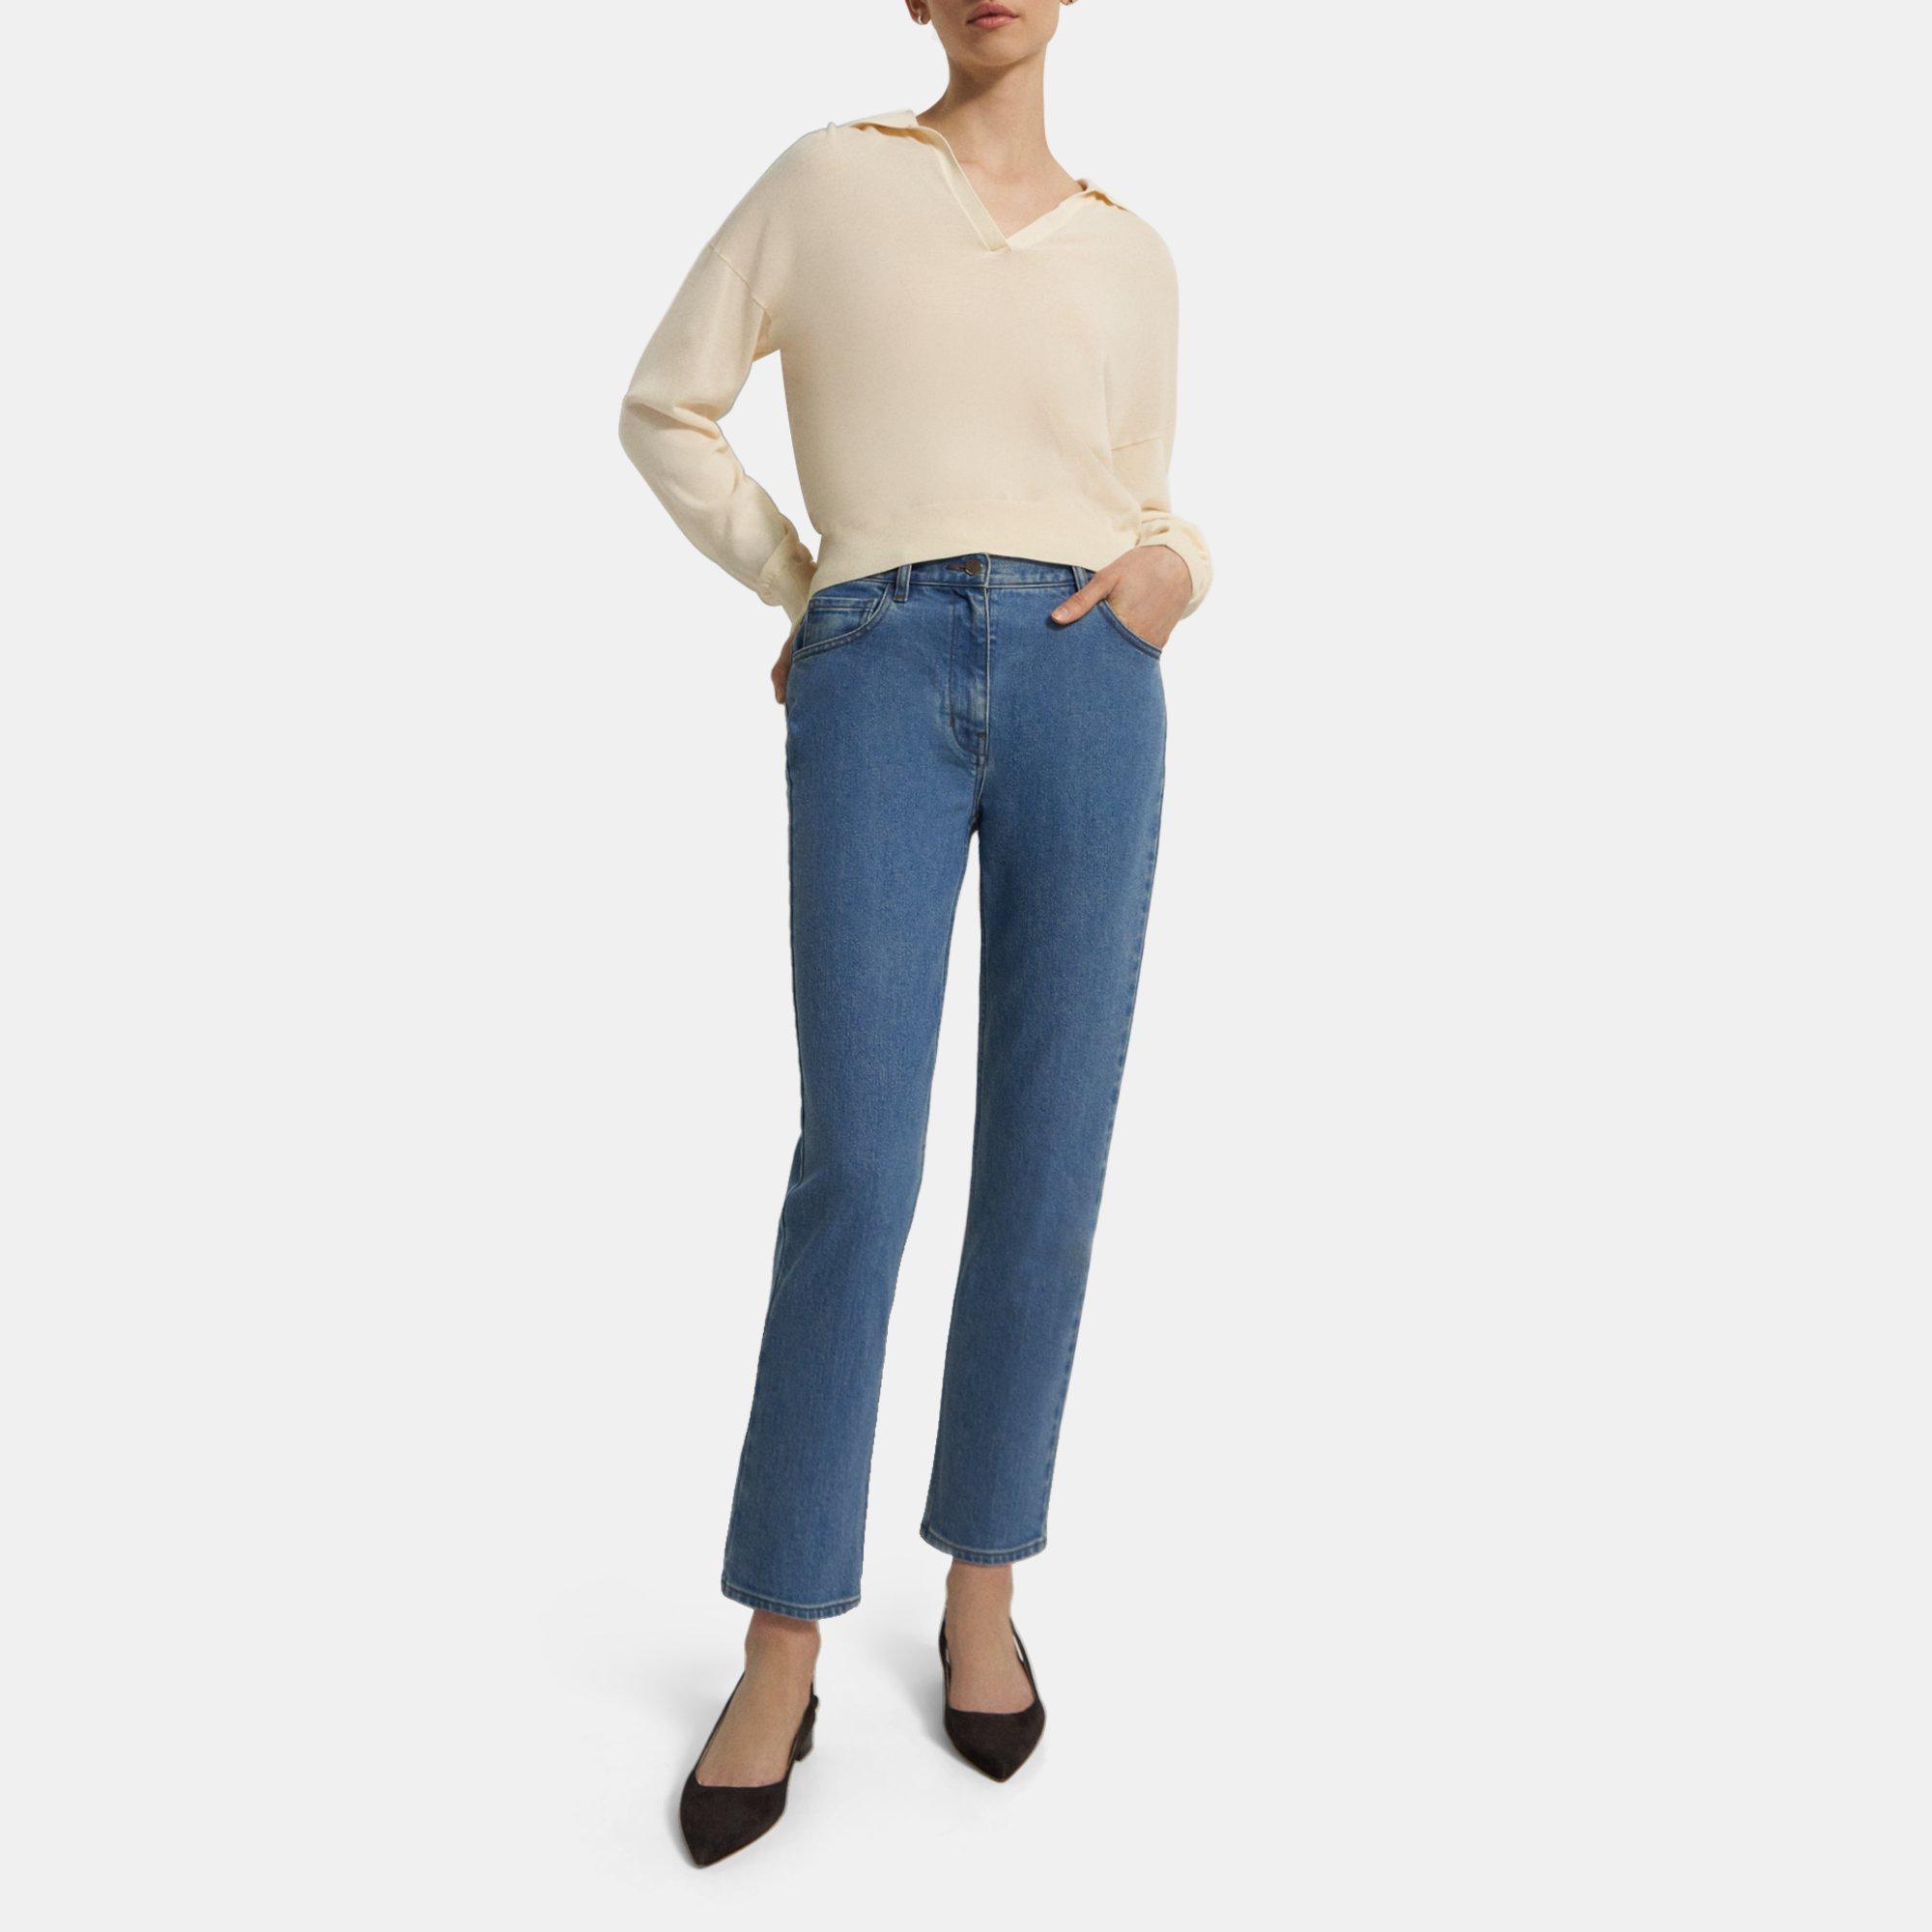 Theory Slim Cropped Jean in Washed Denim